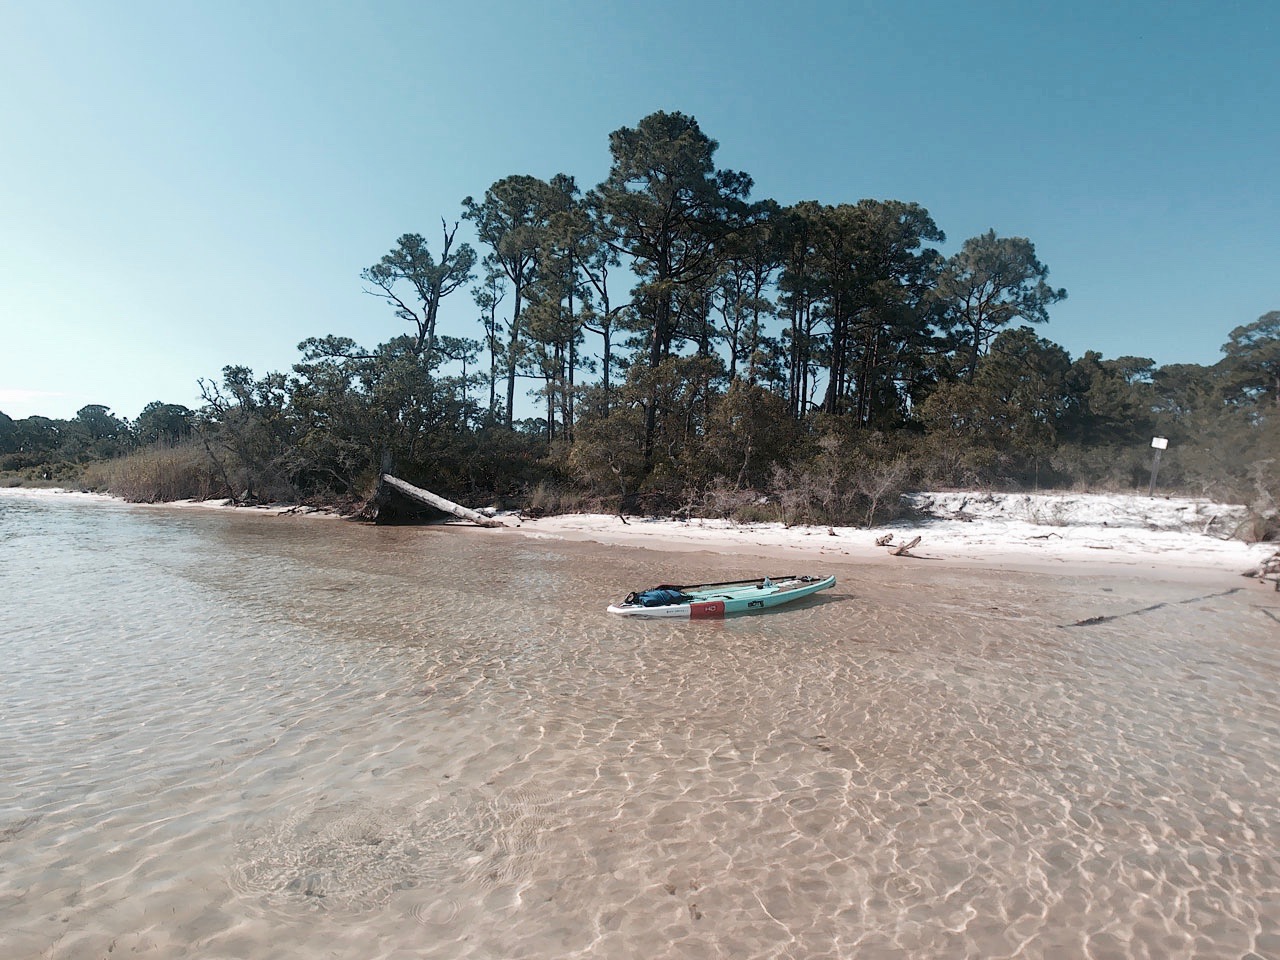 A view of Gulf Islands National Seashore from the water